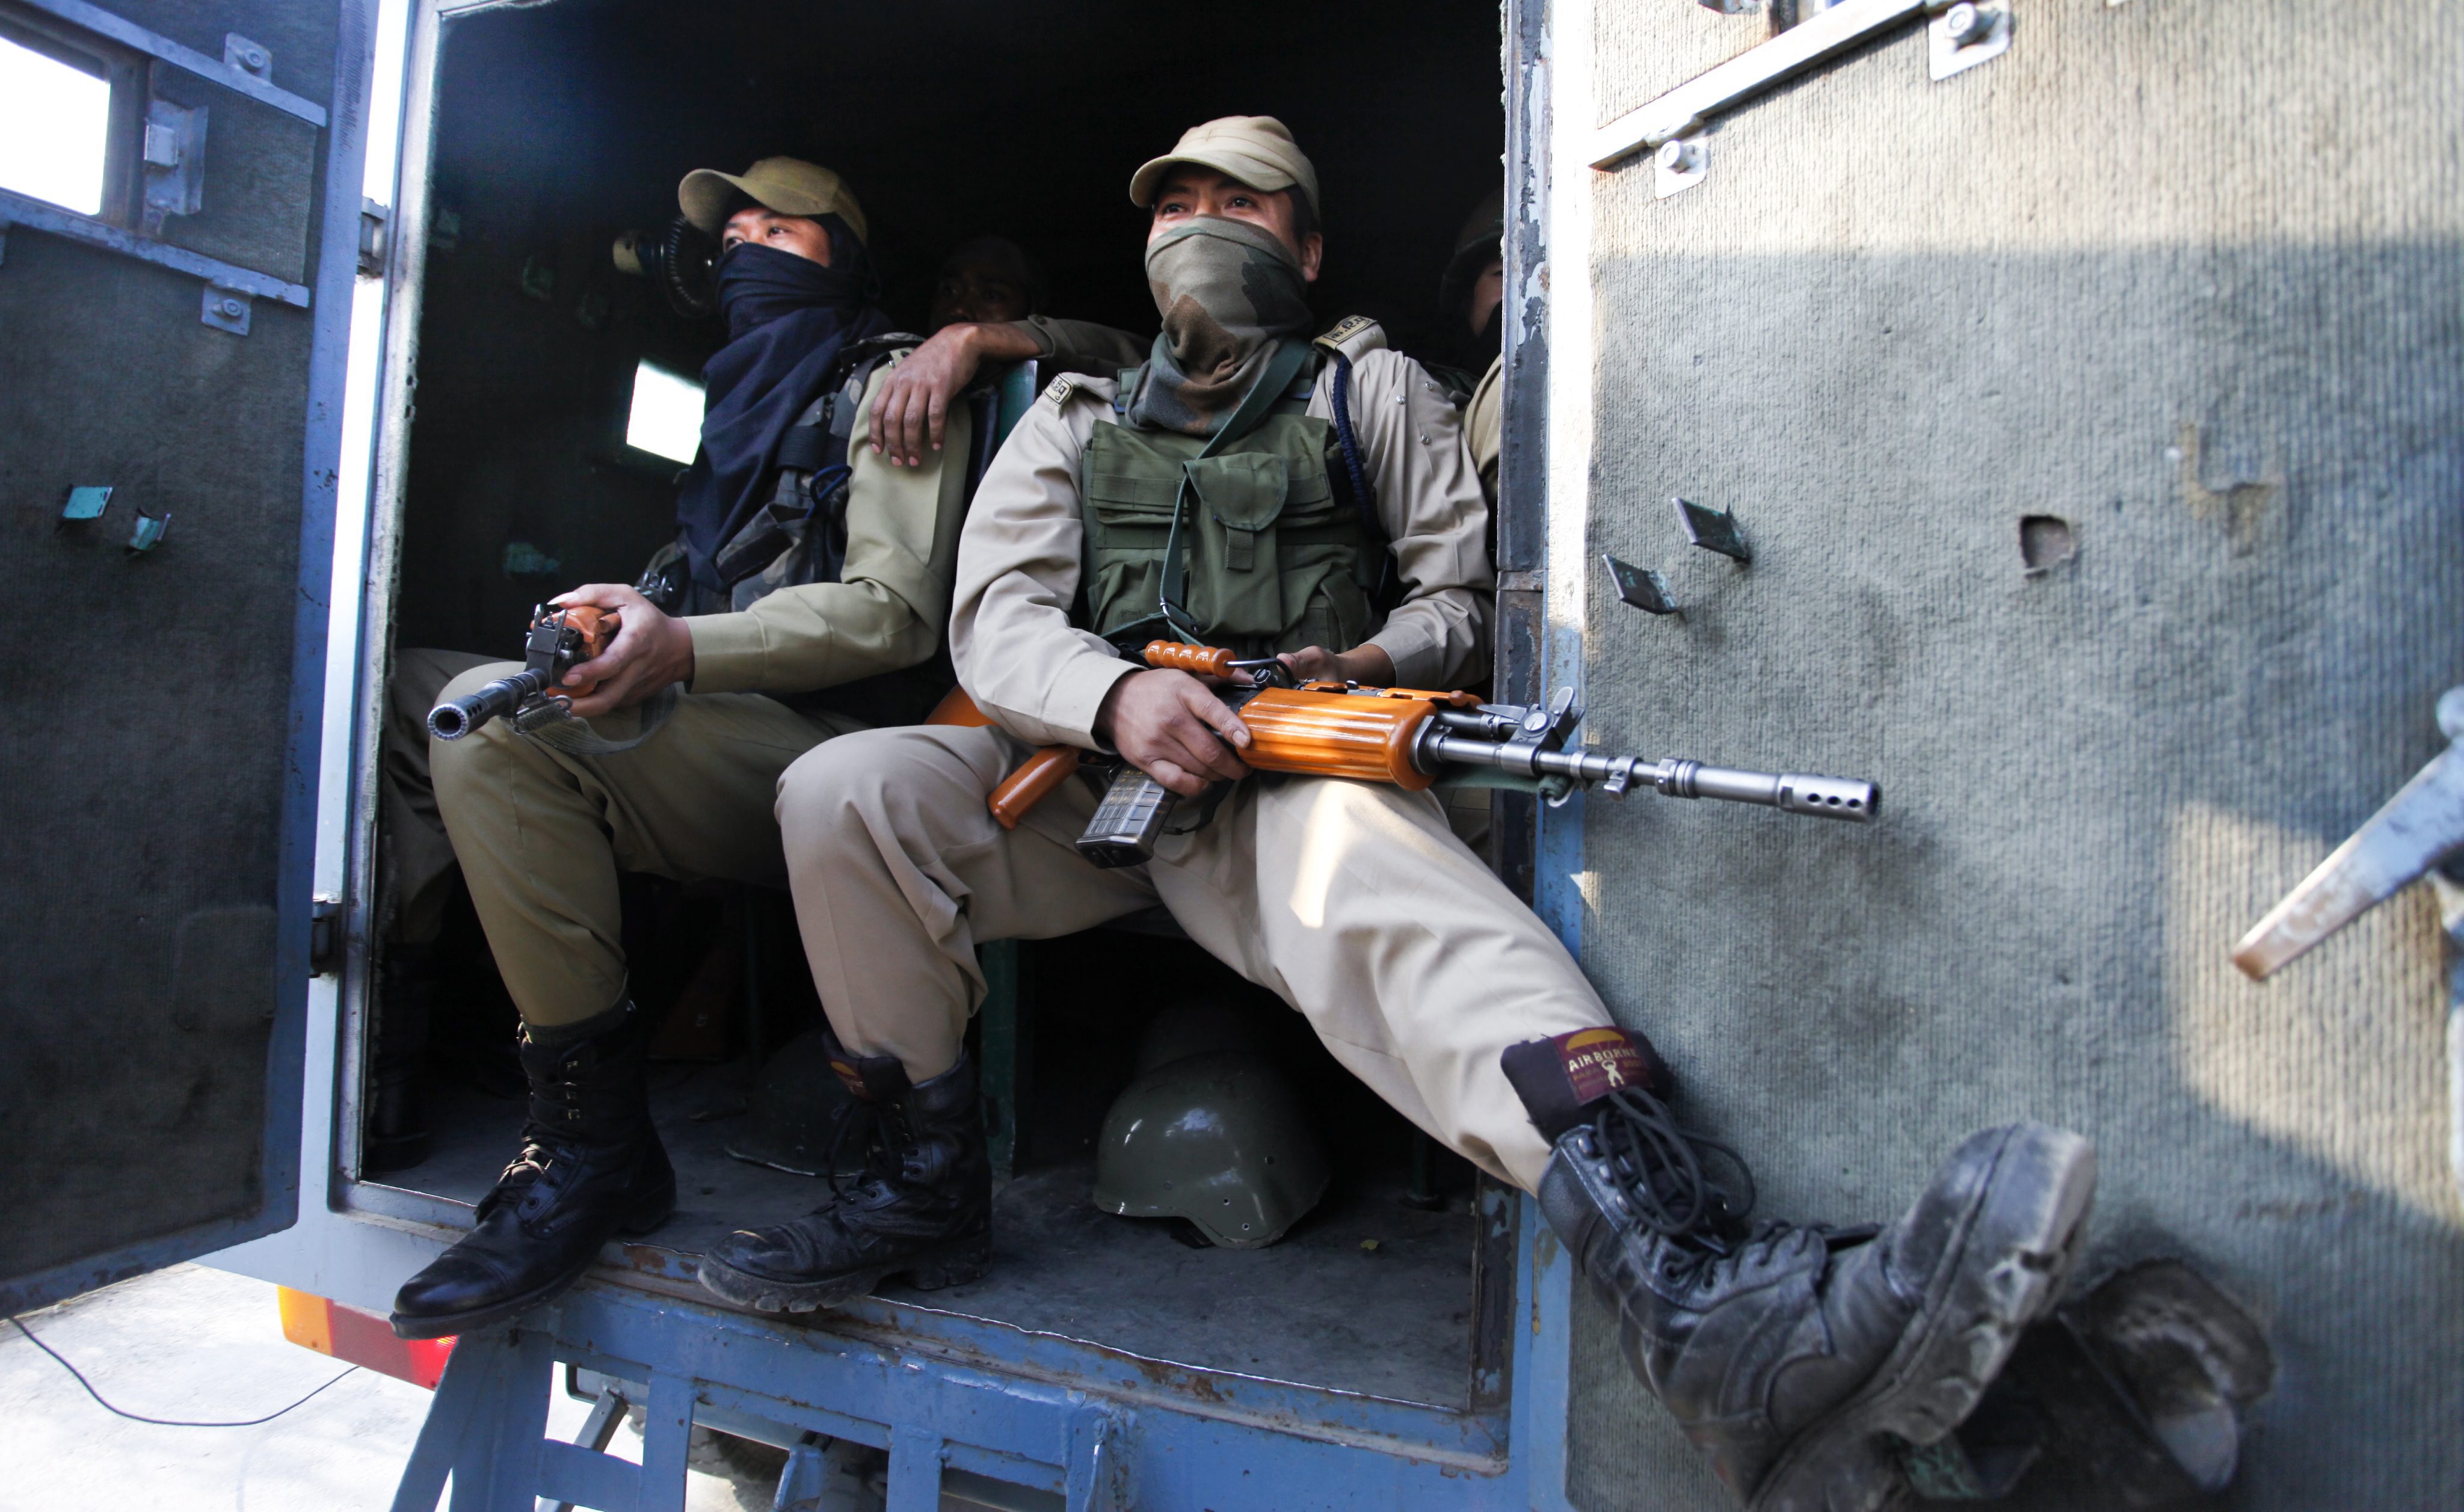 The Indian army says it is battling major infiltration bid in Kashmir. Photo: EPA